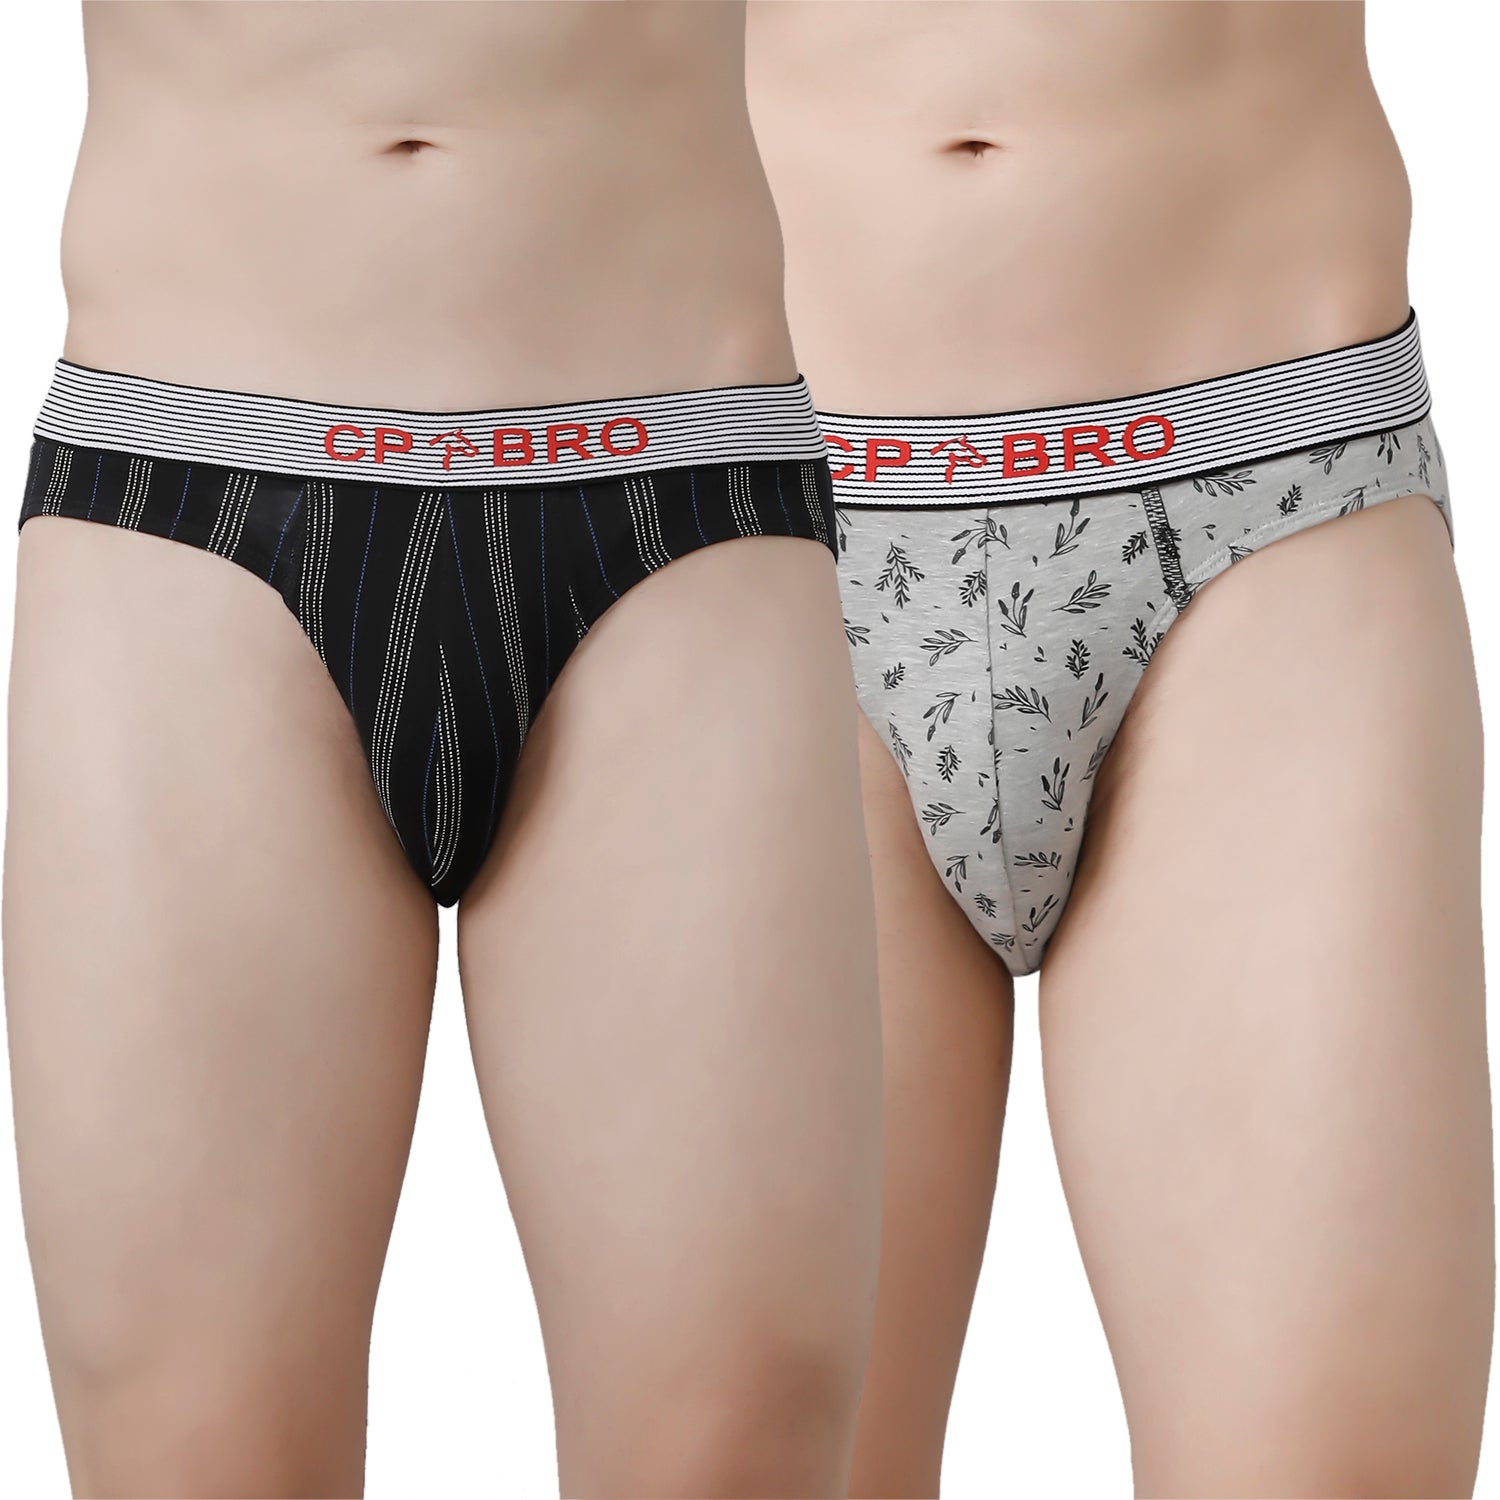 CP BRO Men's Printed Briefs with Exposed Waistband Value Pack - Black Stripe & Grey (Pack of 2)